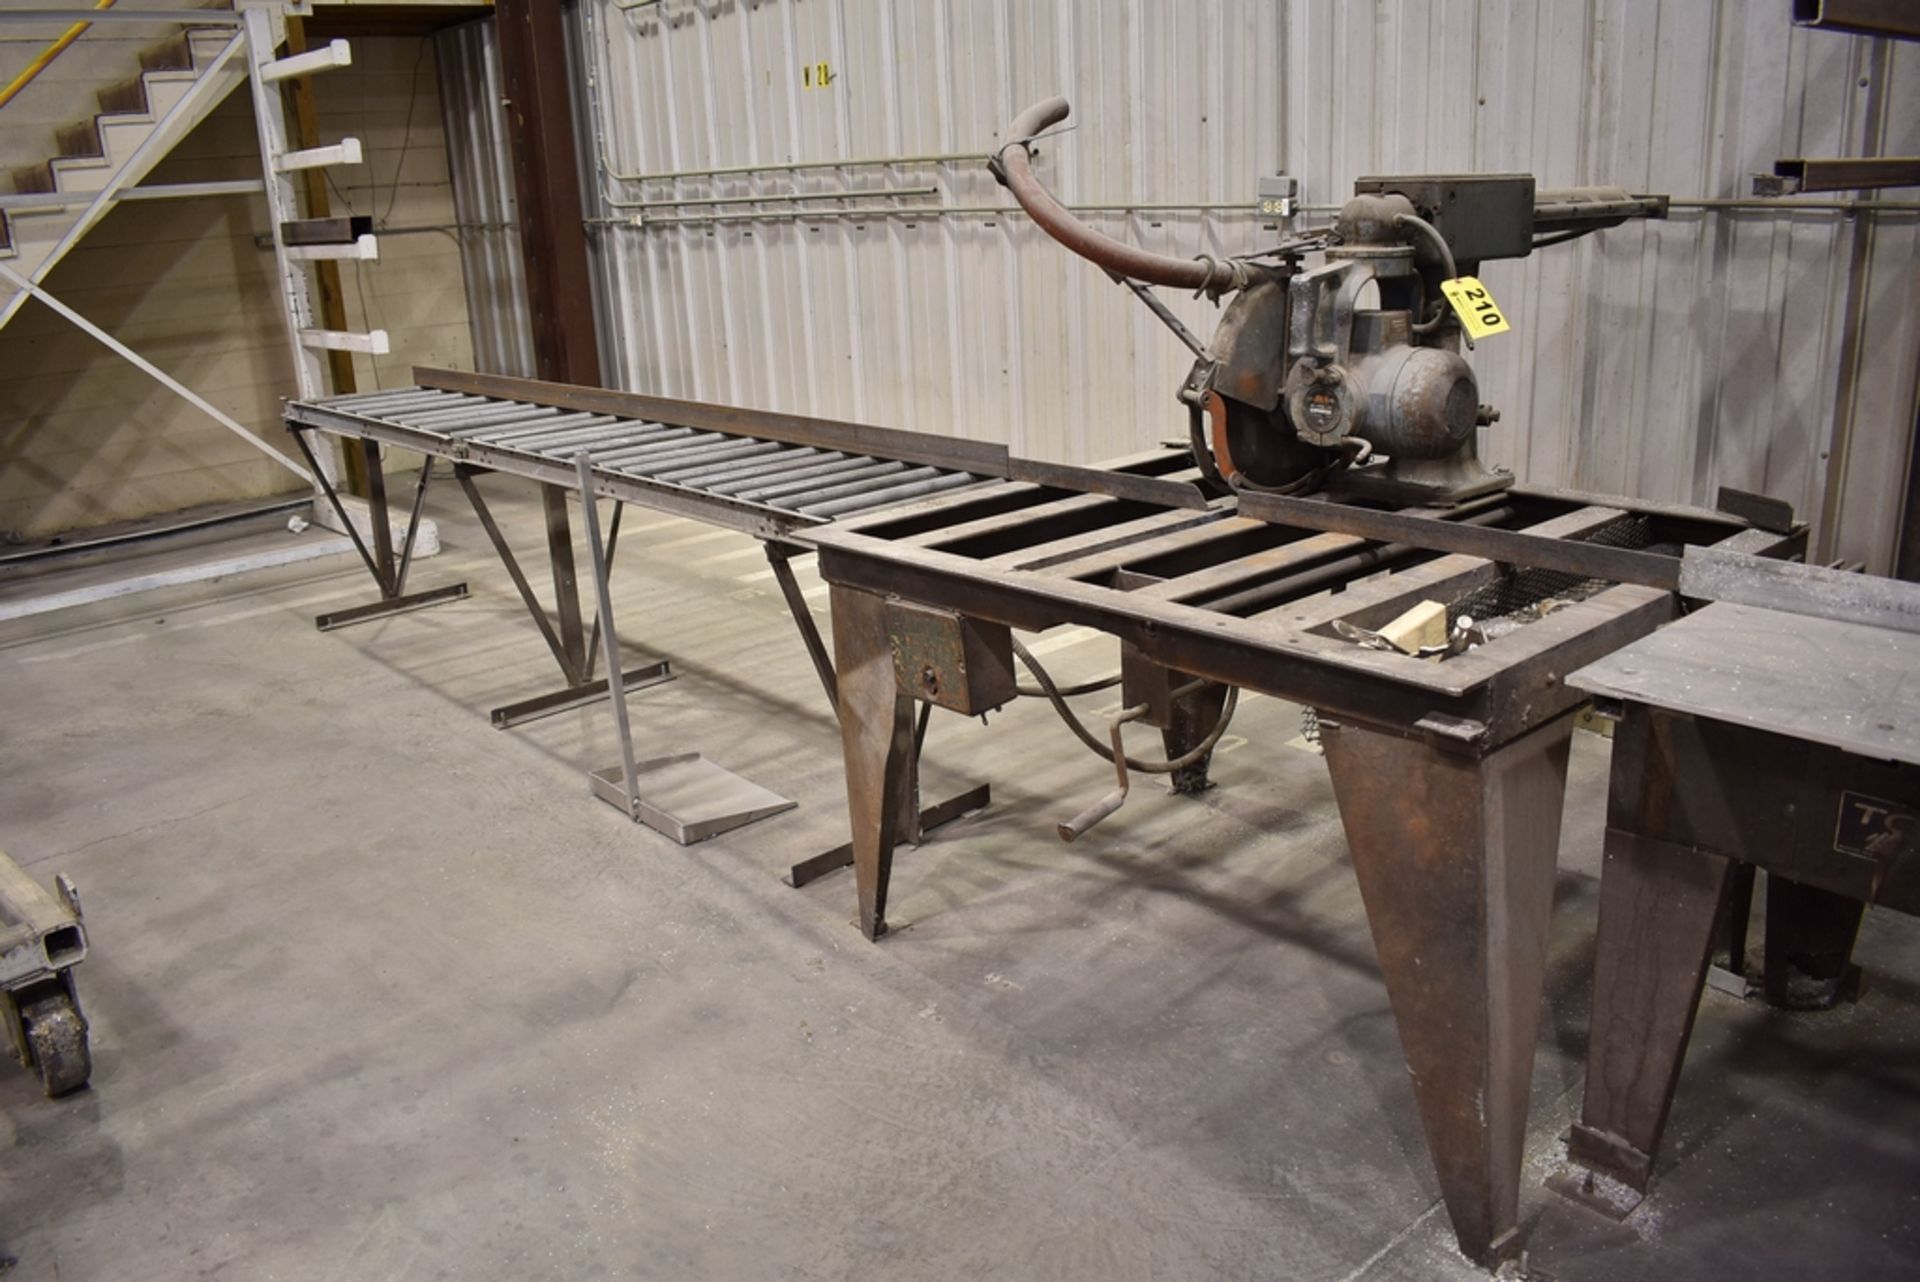 SKIL MODEL 450 14" RADIAL ARM SAW, WITH 10'7" INFEED CONVEYOR - Image 4 of 4